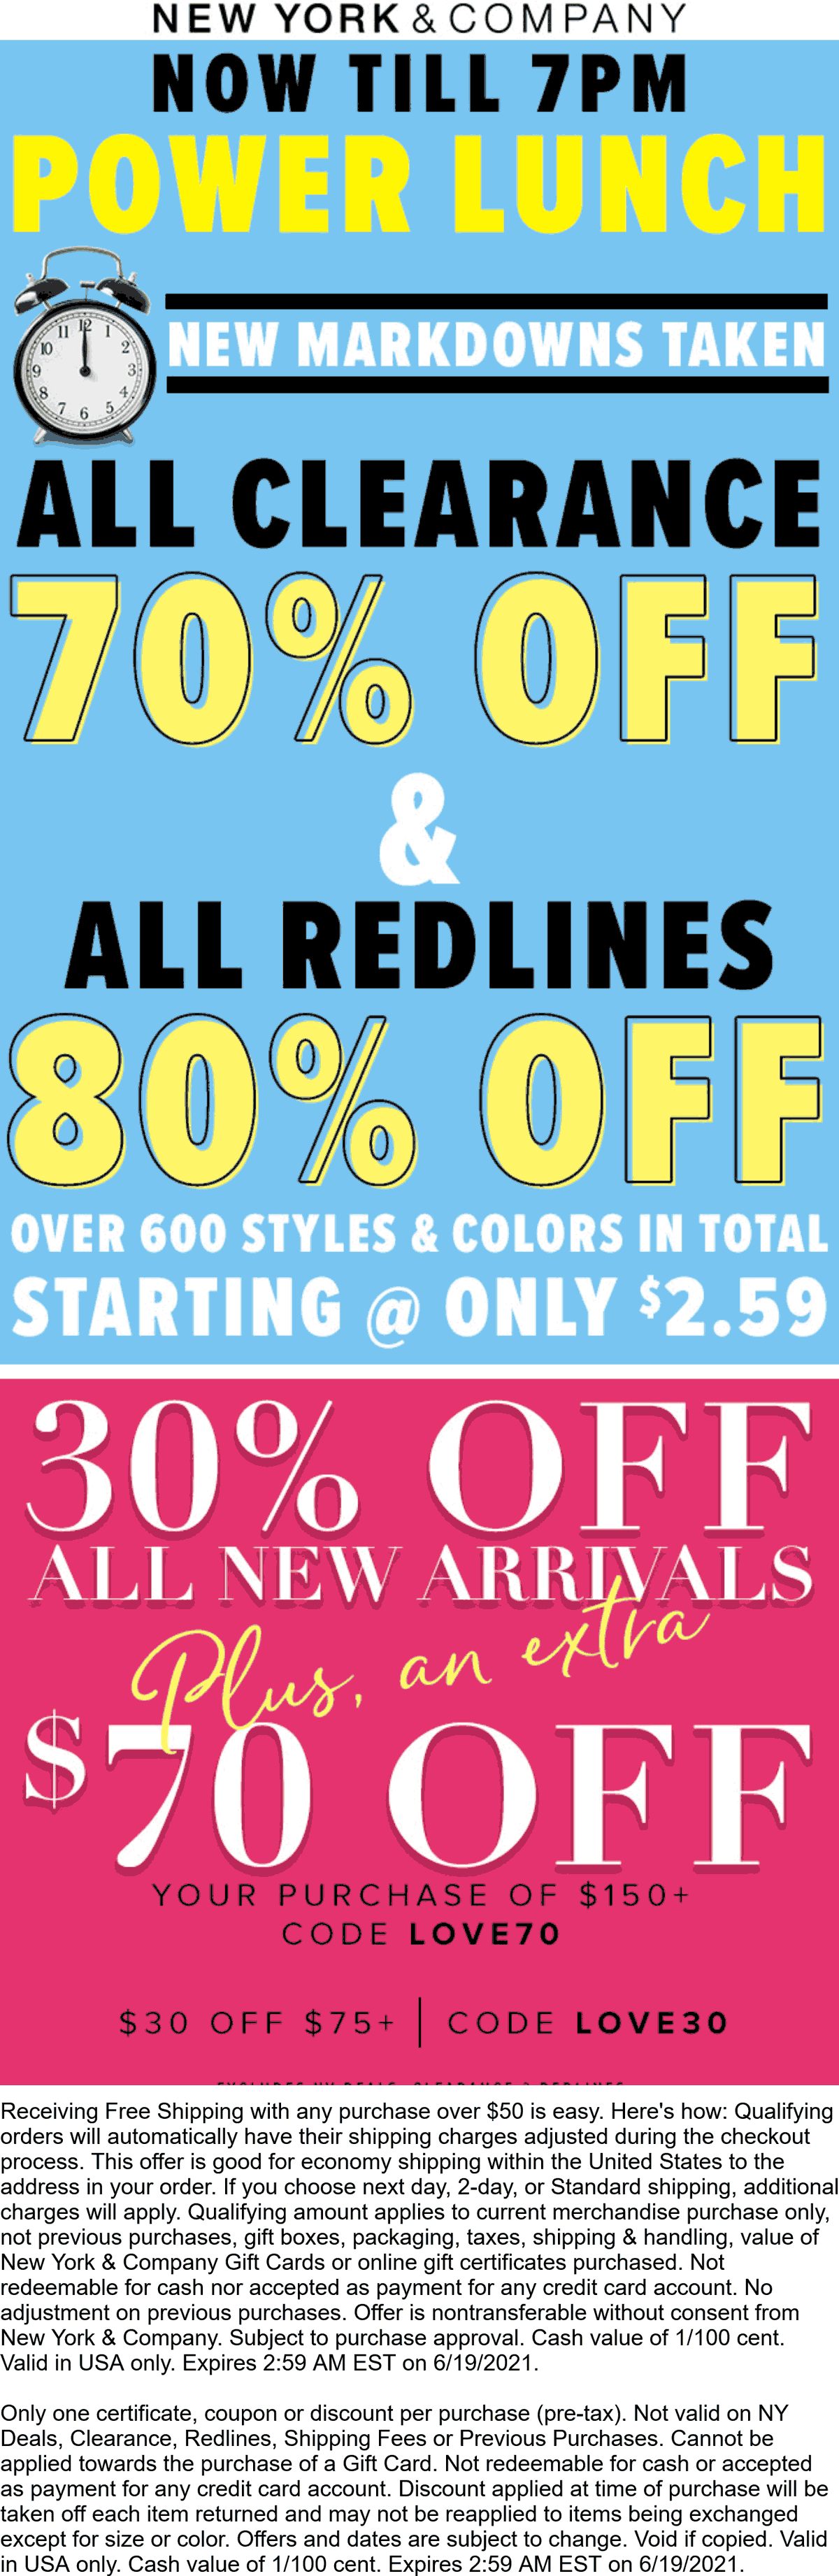 New York & Company stores Coupon  80% off redlines today til 7p at New York & Company #newyorkcompany 